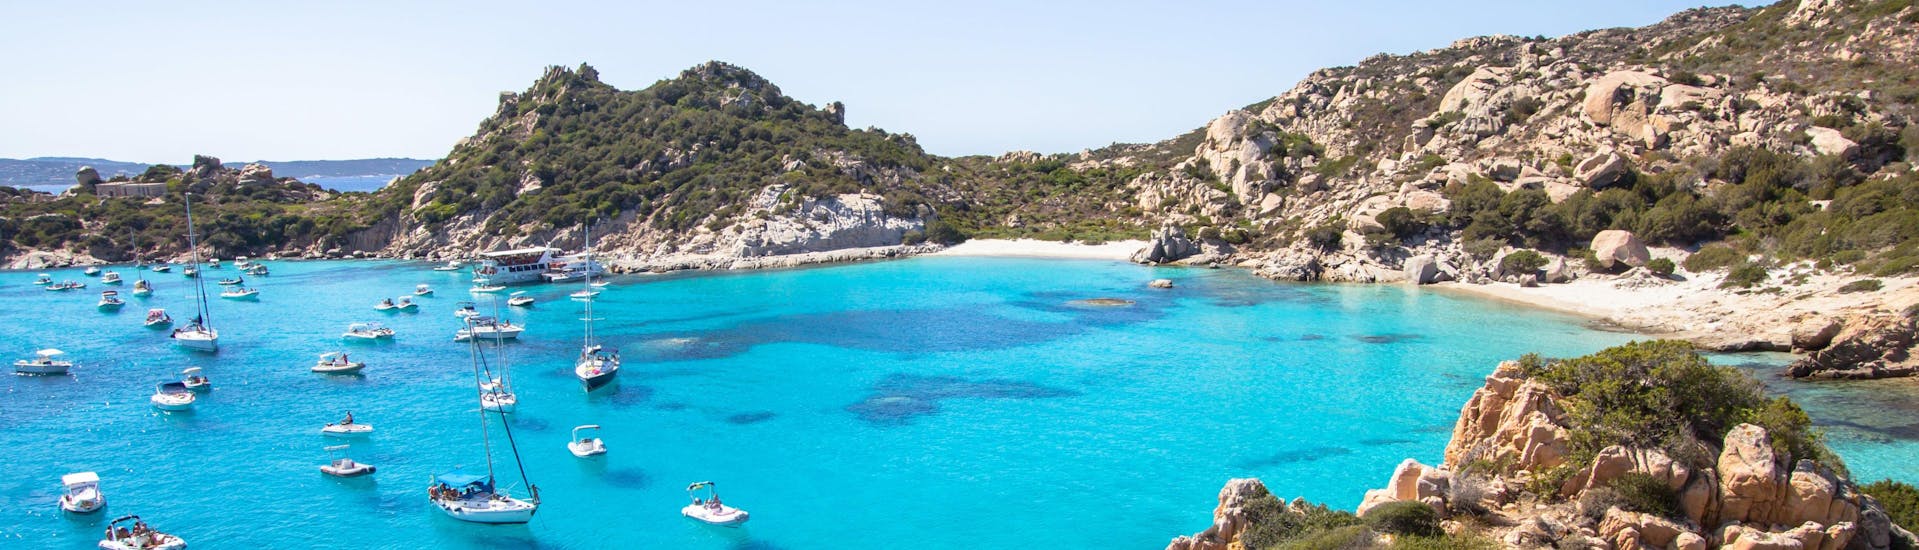 An image of Cala Corsara on the archipelago of La Maddalena, one of the many places you can visit on a boat tour in Sardinia.